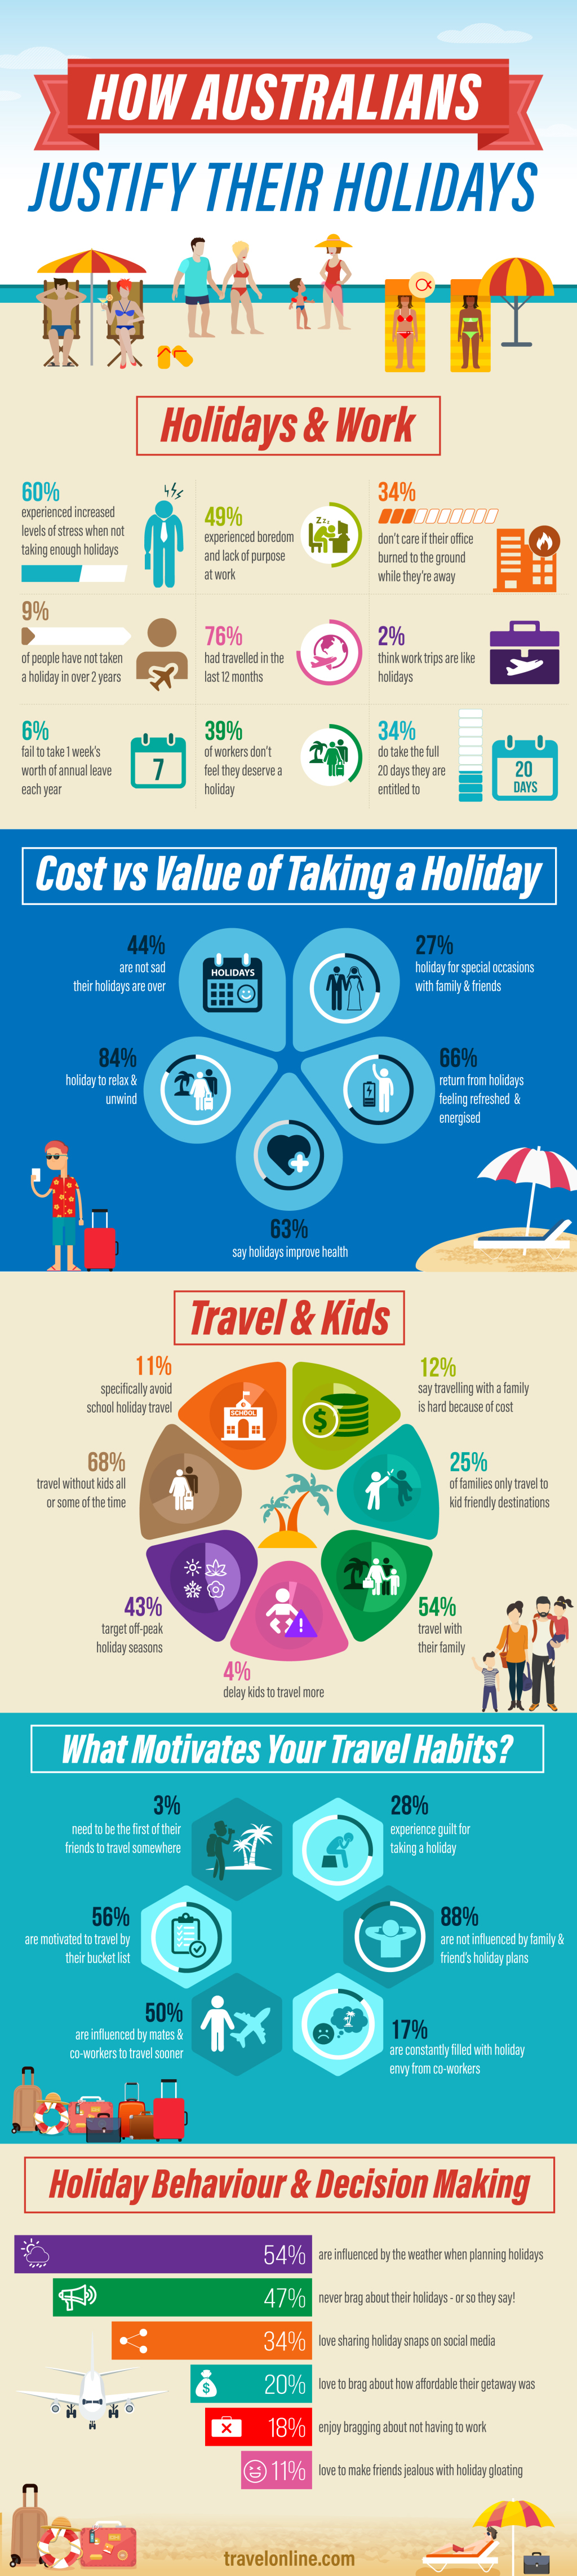 Infographic - How Australians Justify Their Holidays